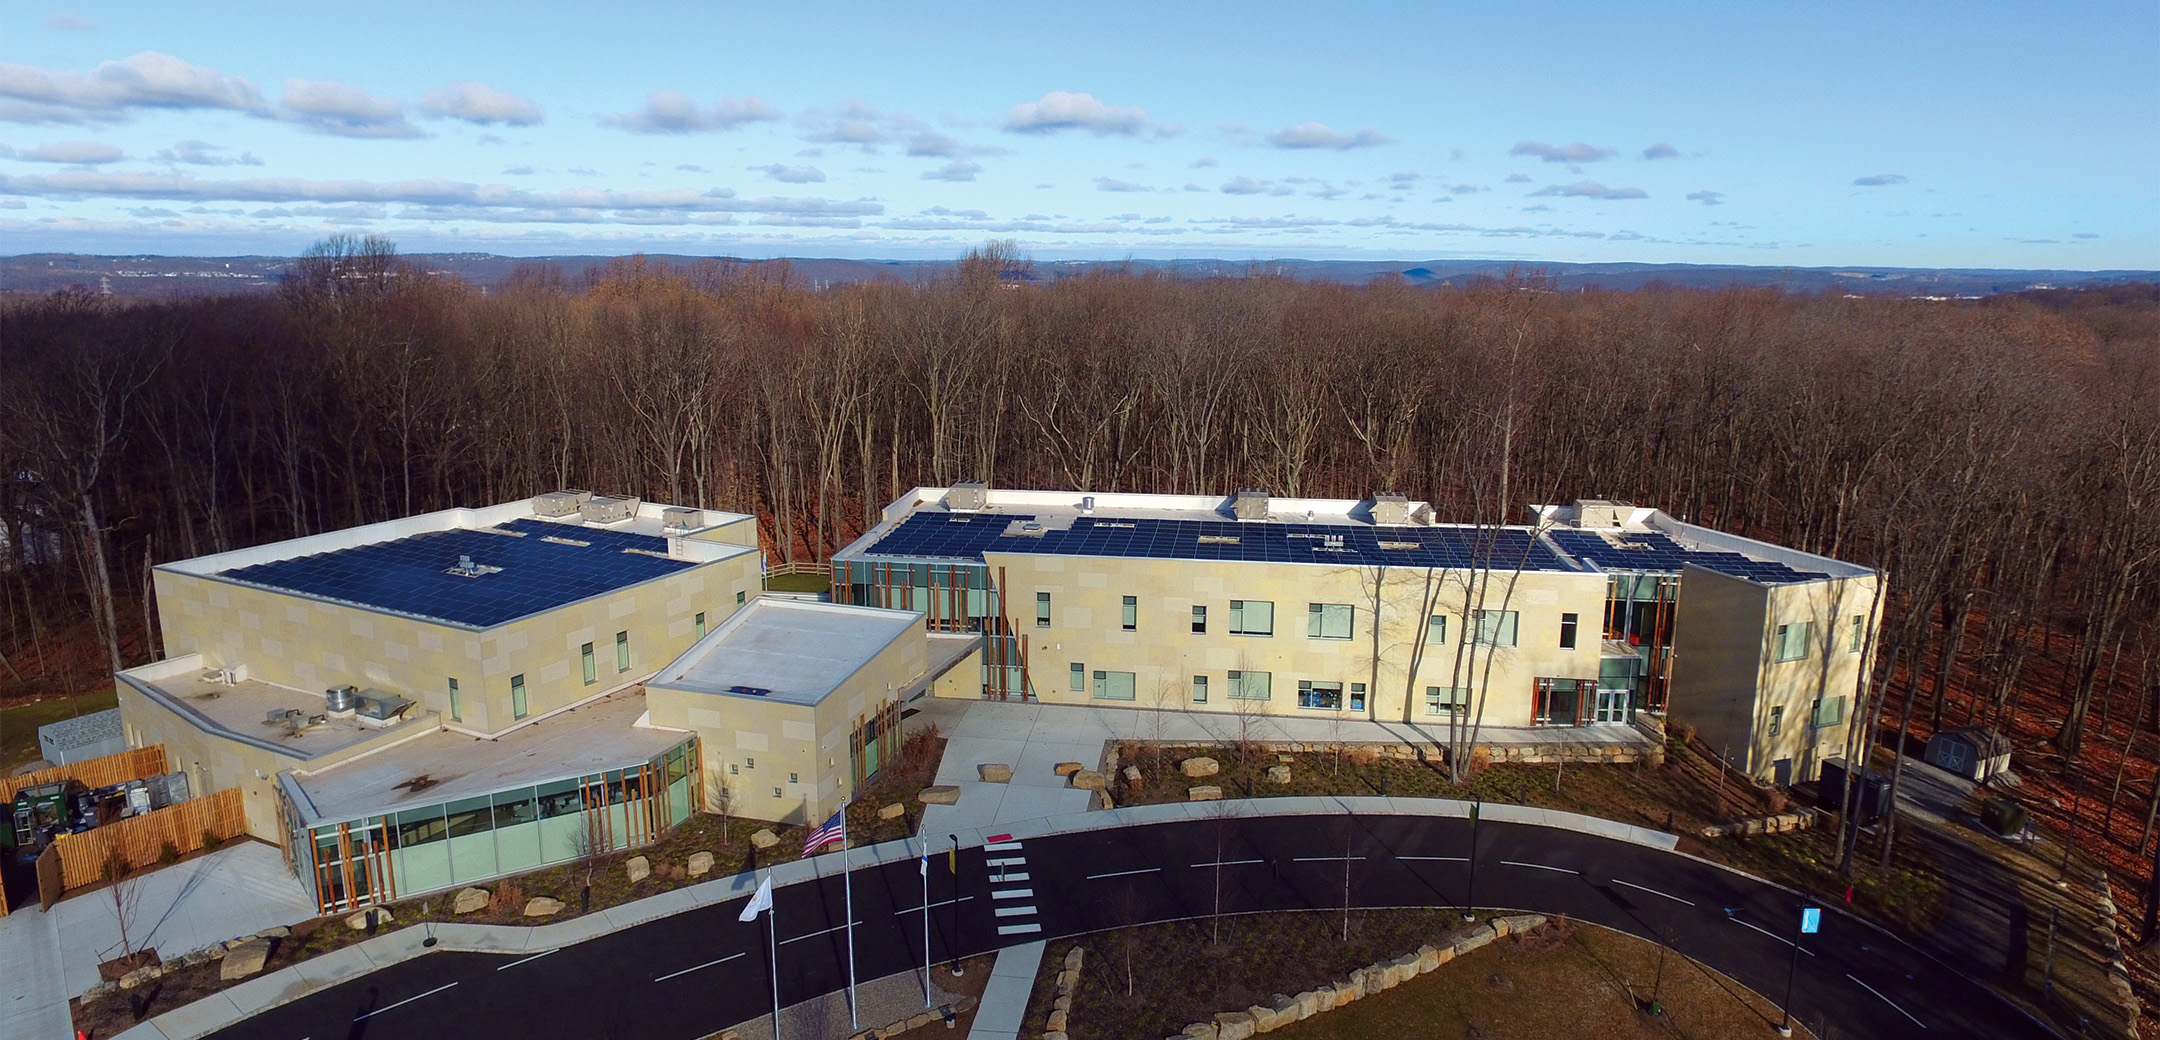 A drone aerial image of the Gottesman RTW Academy building showcasing the layout, woods in the background and front driveway.